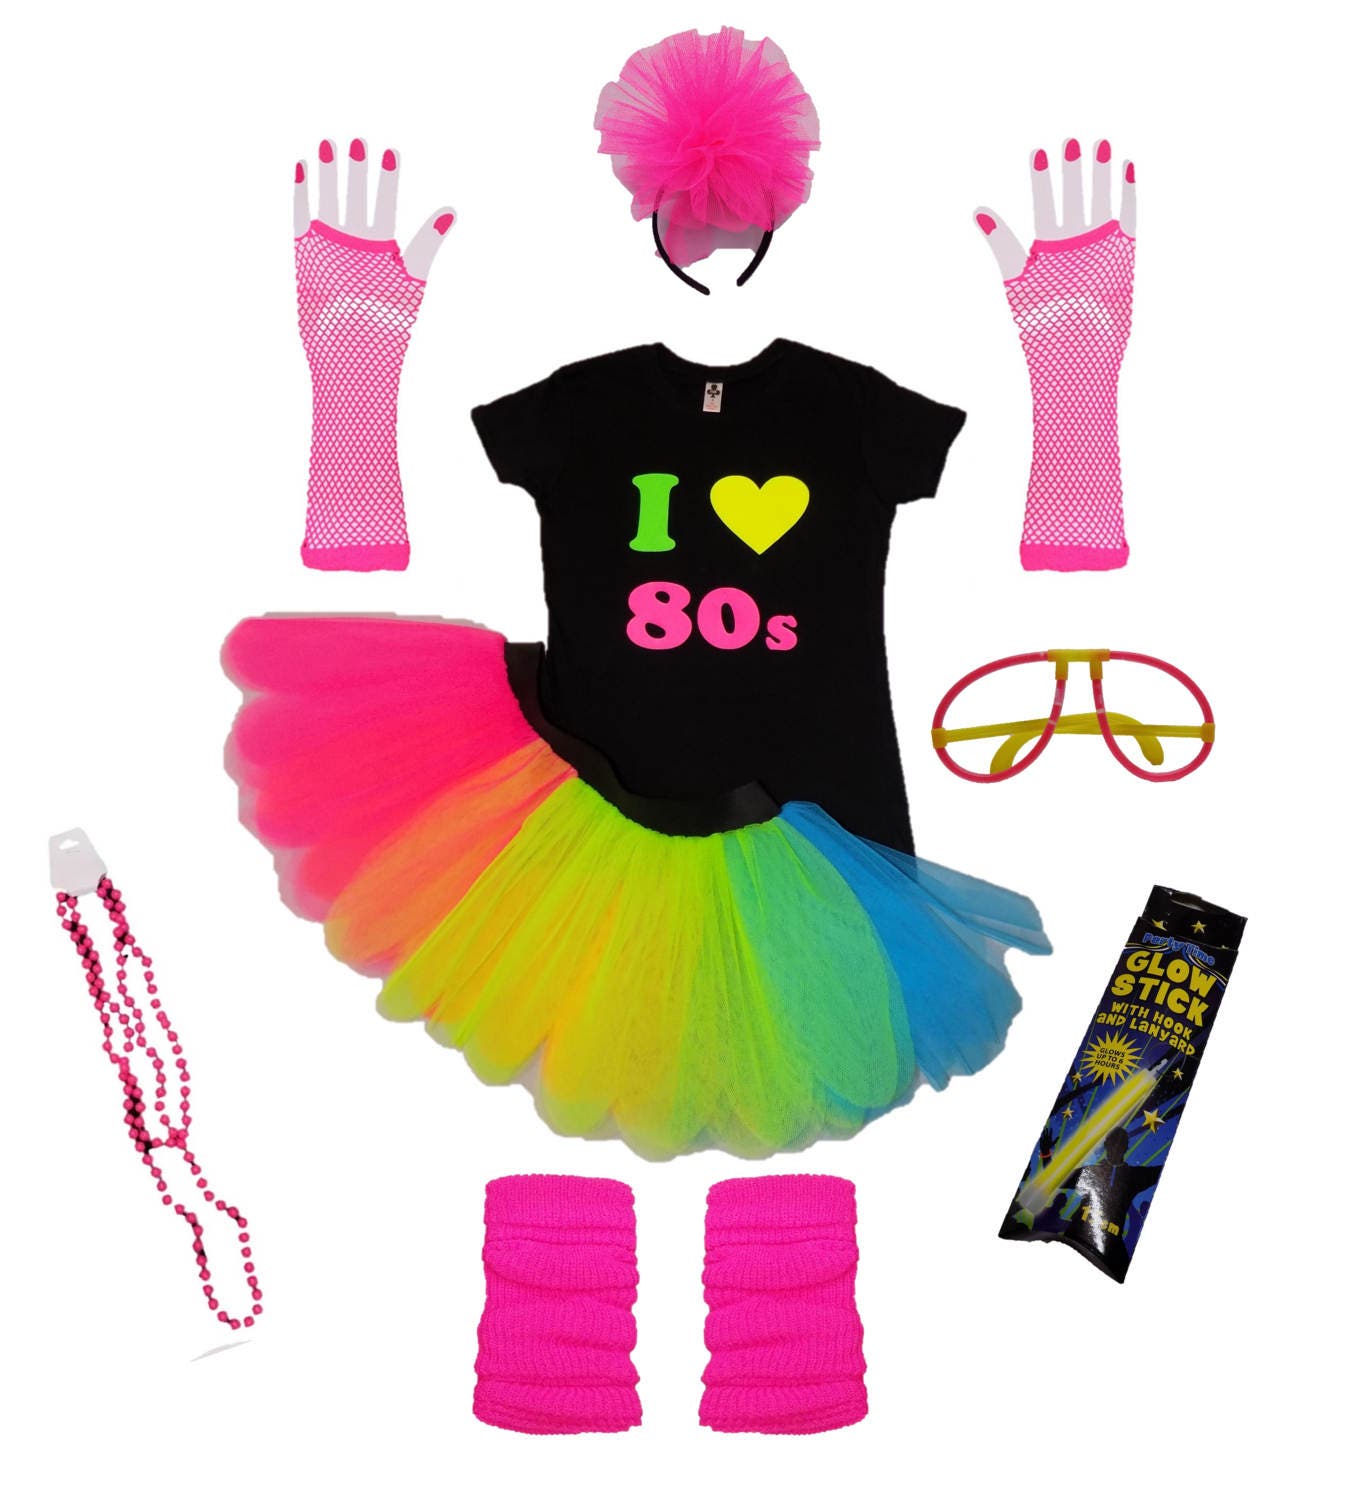 Neon Tutu Skirt With Glow Stick Accessories, T-shirt Set, Leg Warmers Gloves,  Beaded Necklace, Hen Party Outfit 80s Fun 